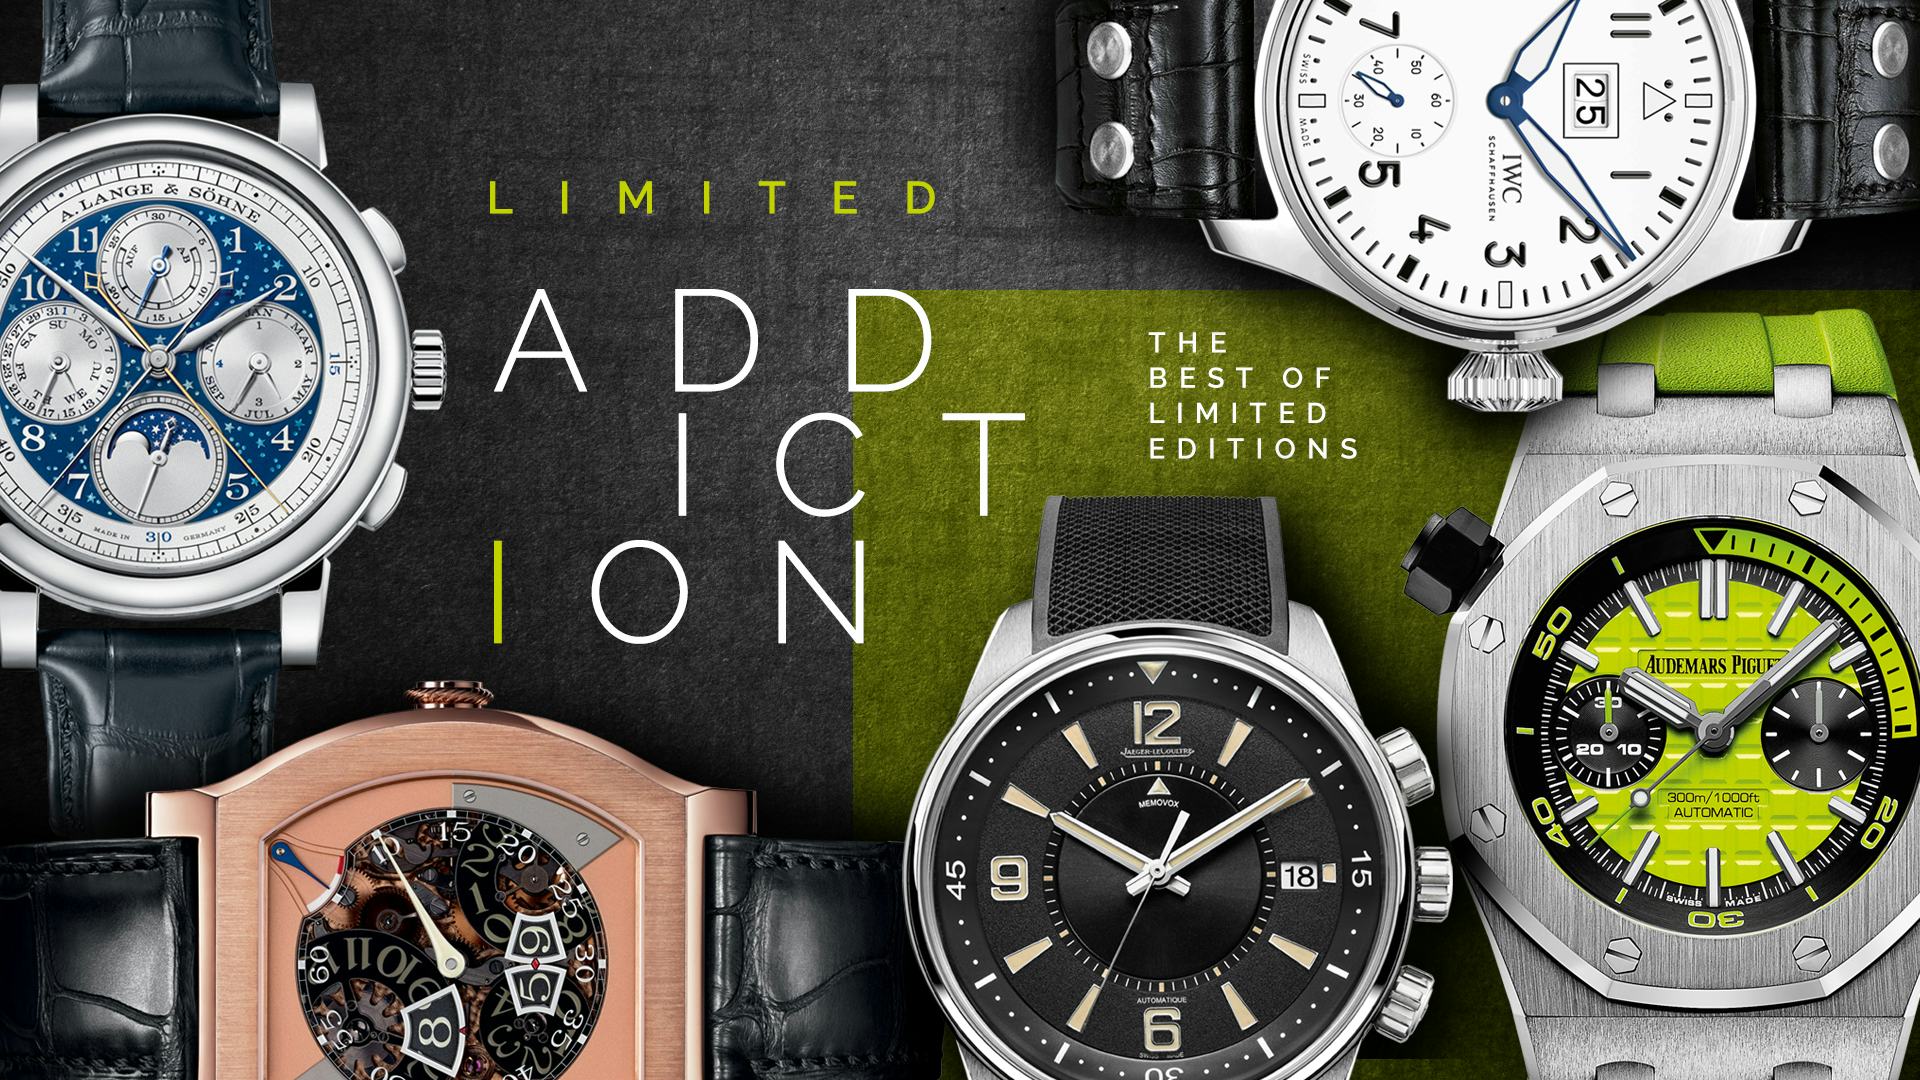 Limited Addiction: The Best of Limited Editions